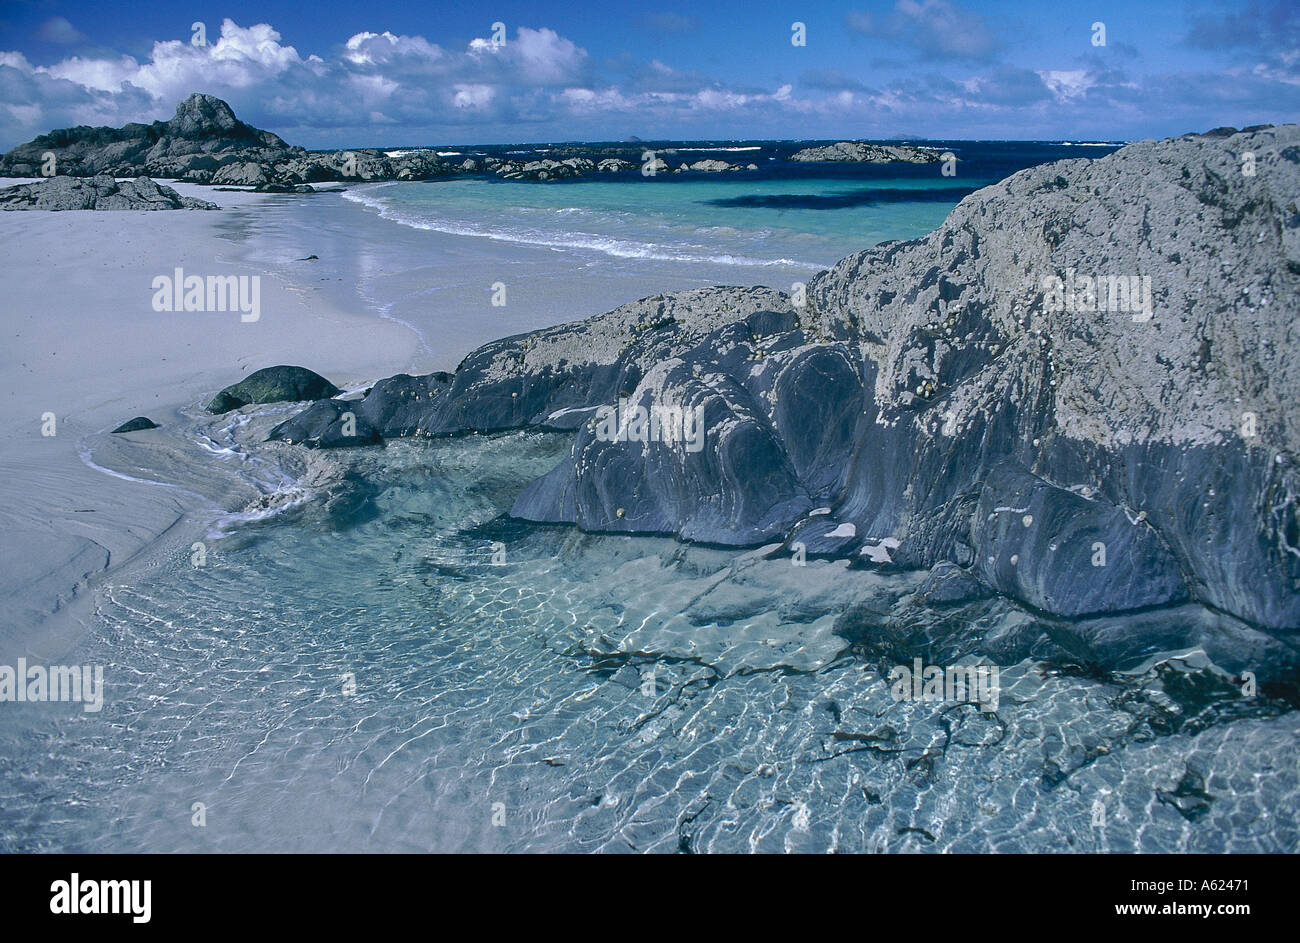 SCOTLAND Isle Of Iona White sandy beach with rocks and clear blue water. Stock Photo